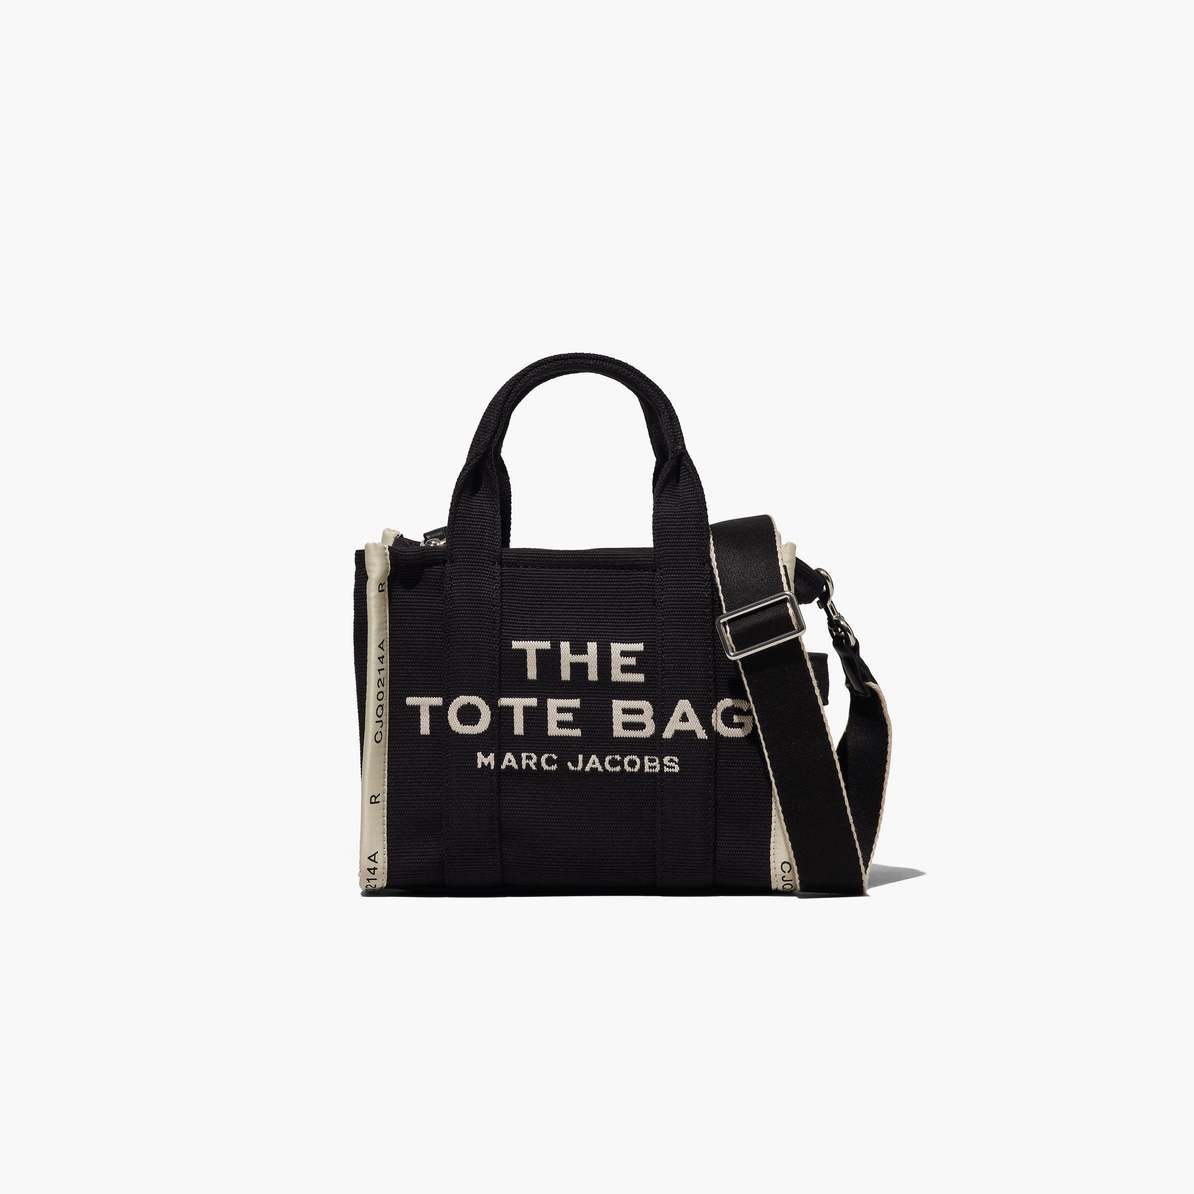 Marc Jacobs Canada - The Tote Bag Marc Jacobs Sale Canada